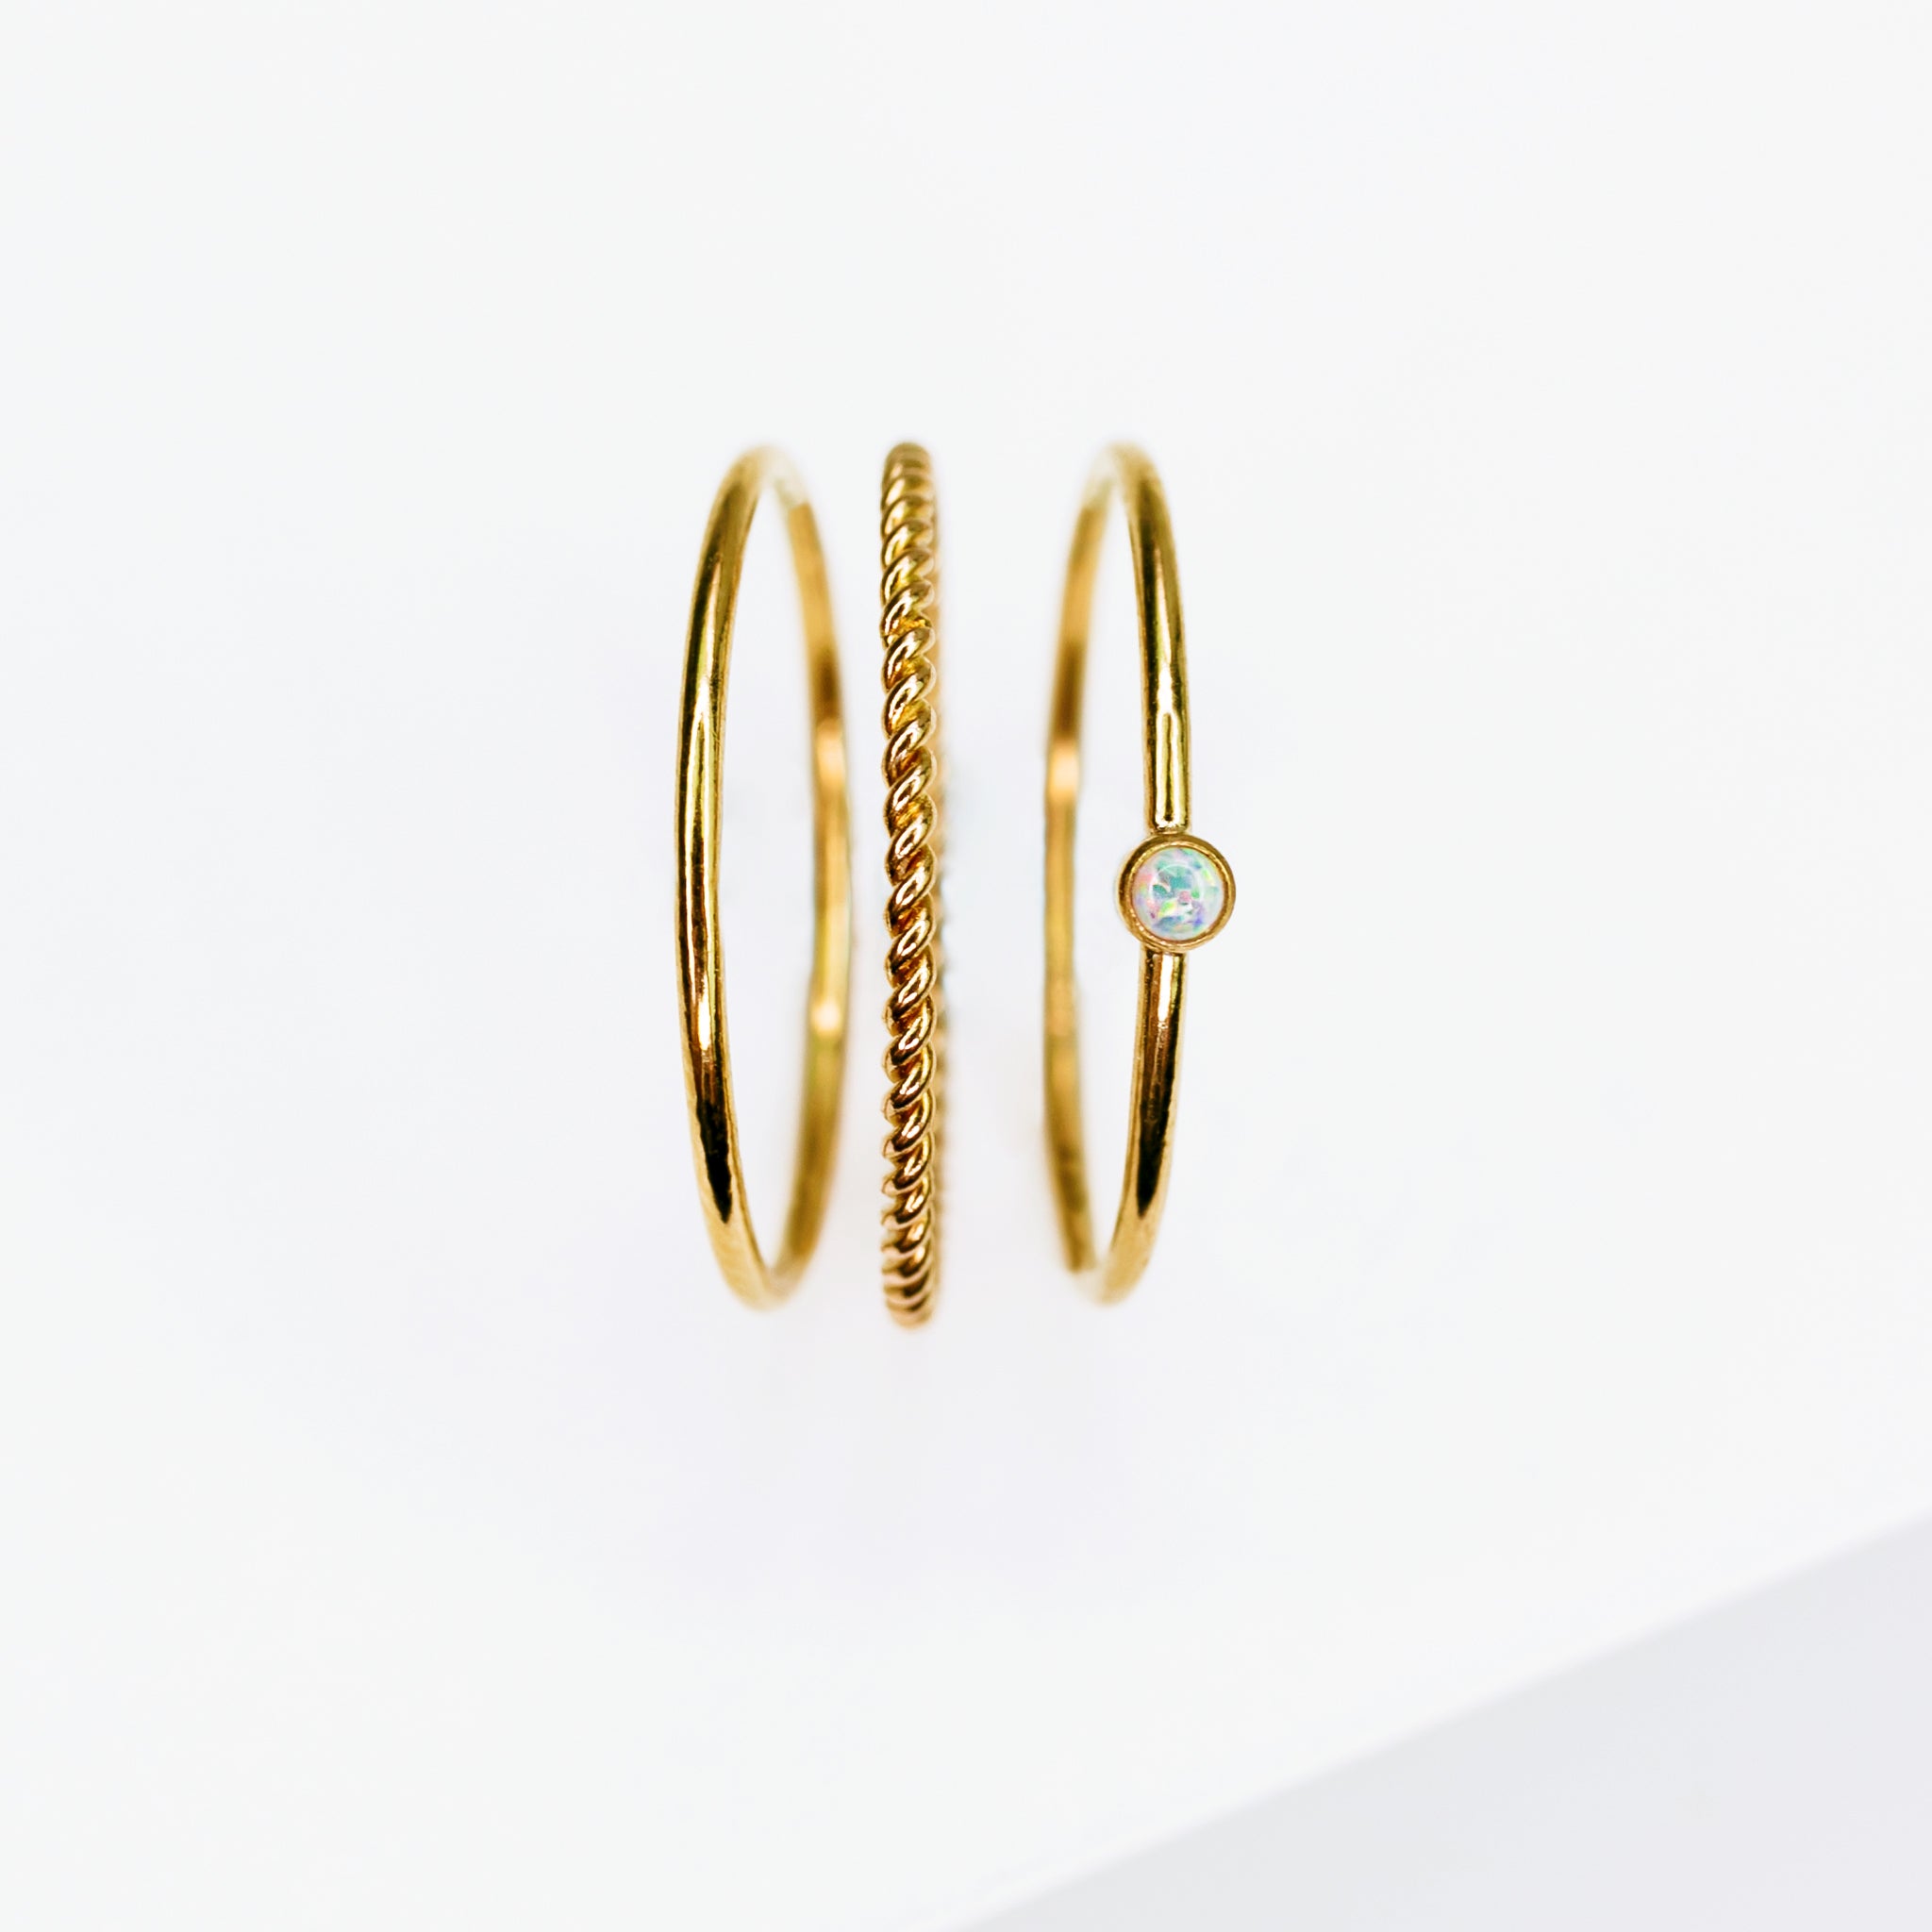 Opal + Textured Rings Stack - Set of 3 - 14k Gold Fill